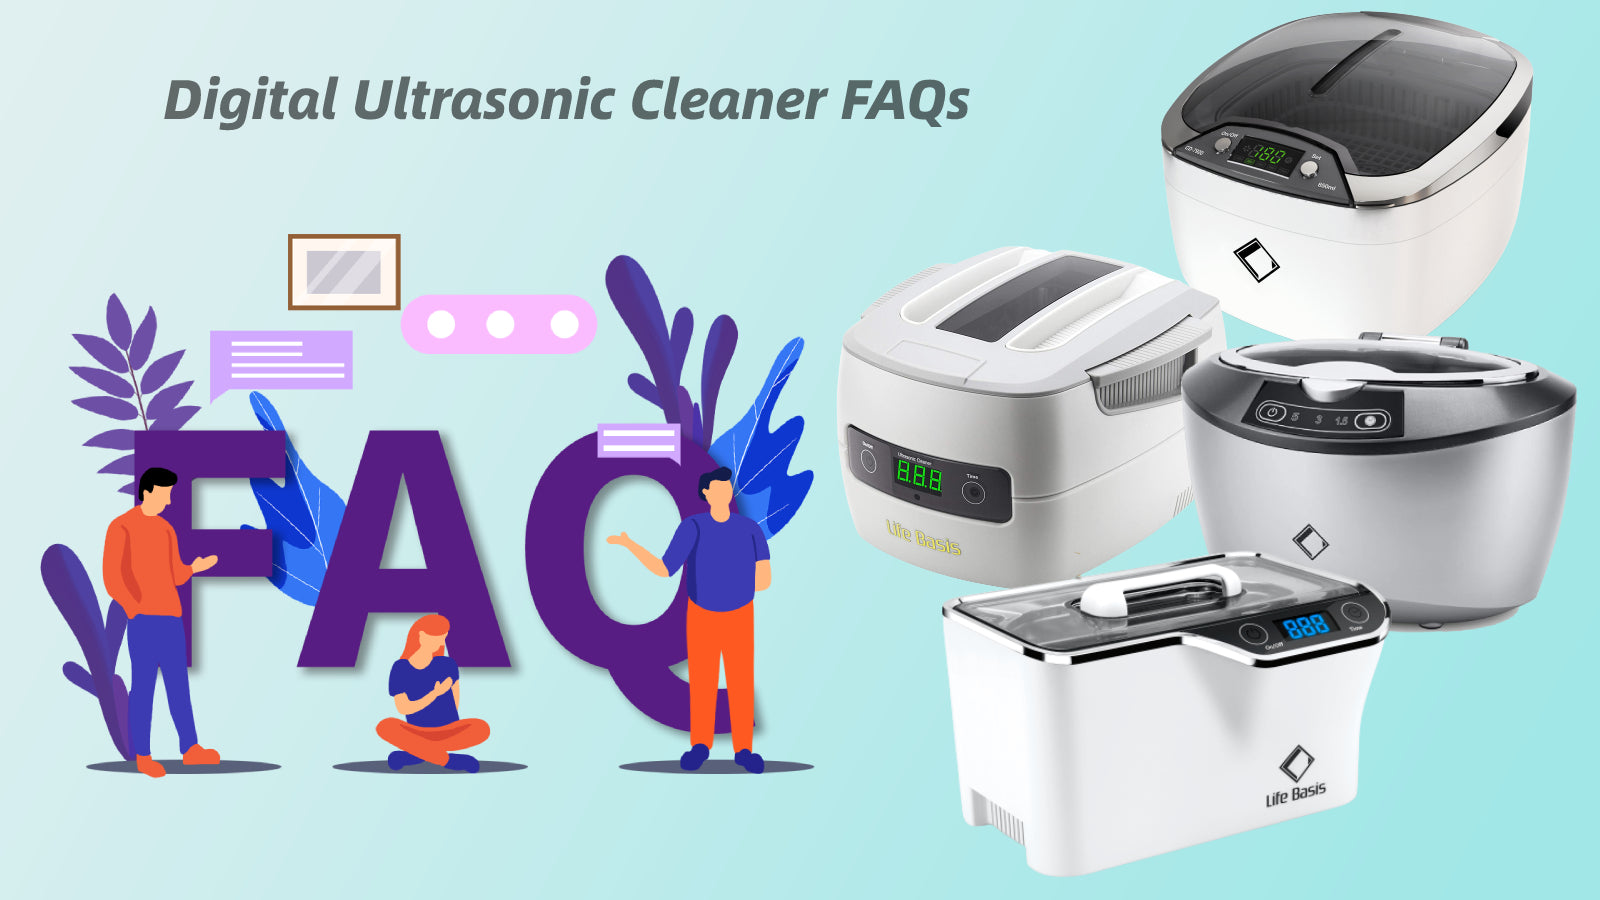 How To Remove Silver Tarnish By Ultraonic Jewelry Cleaner? – LifeBasis